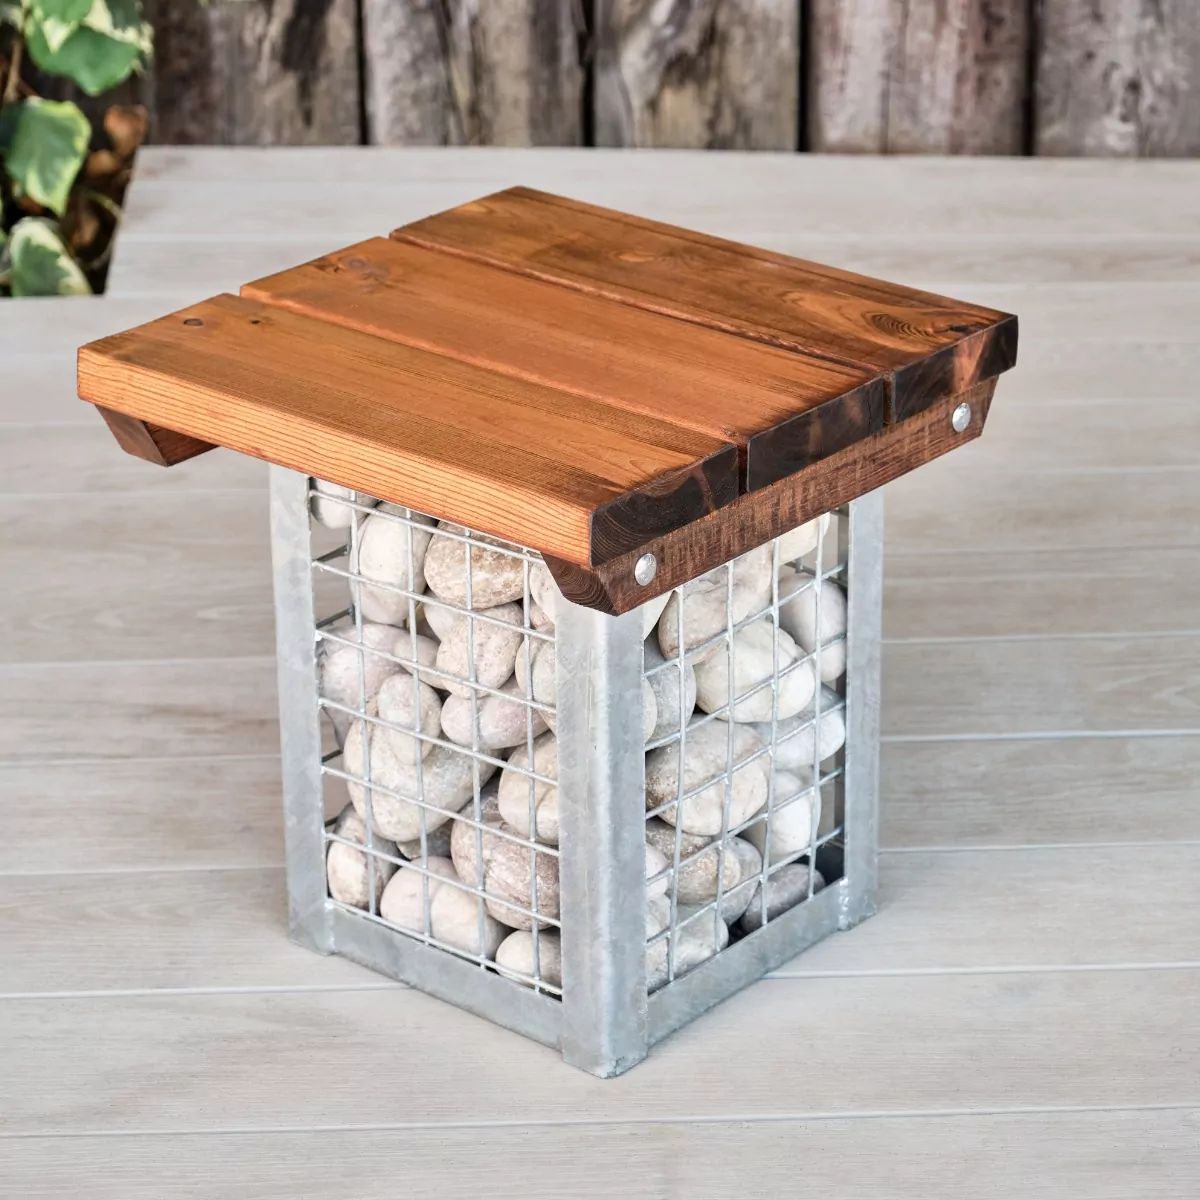 Wood & Metal Gabion Square Stool with Atlantic Cobble Filling For Use Outdoors Only